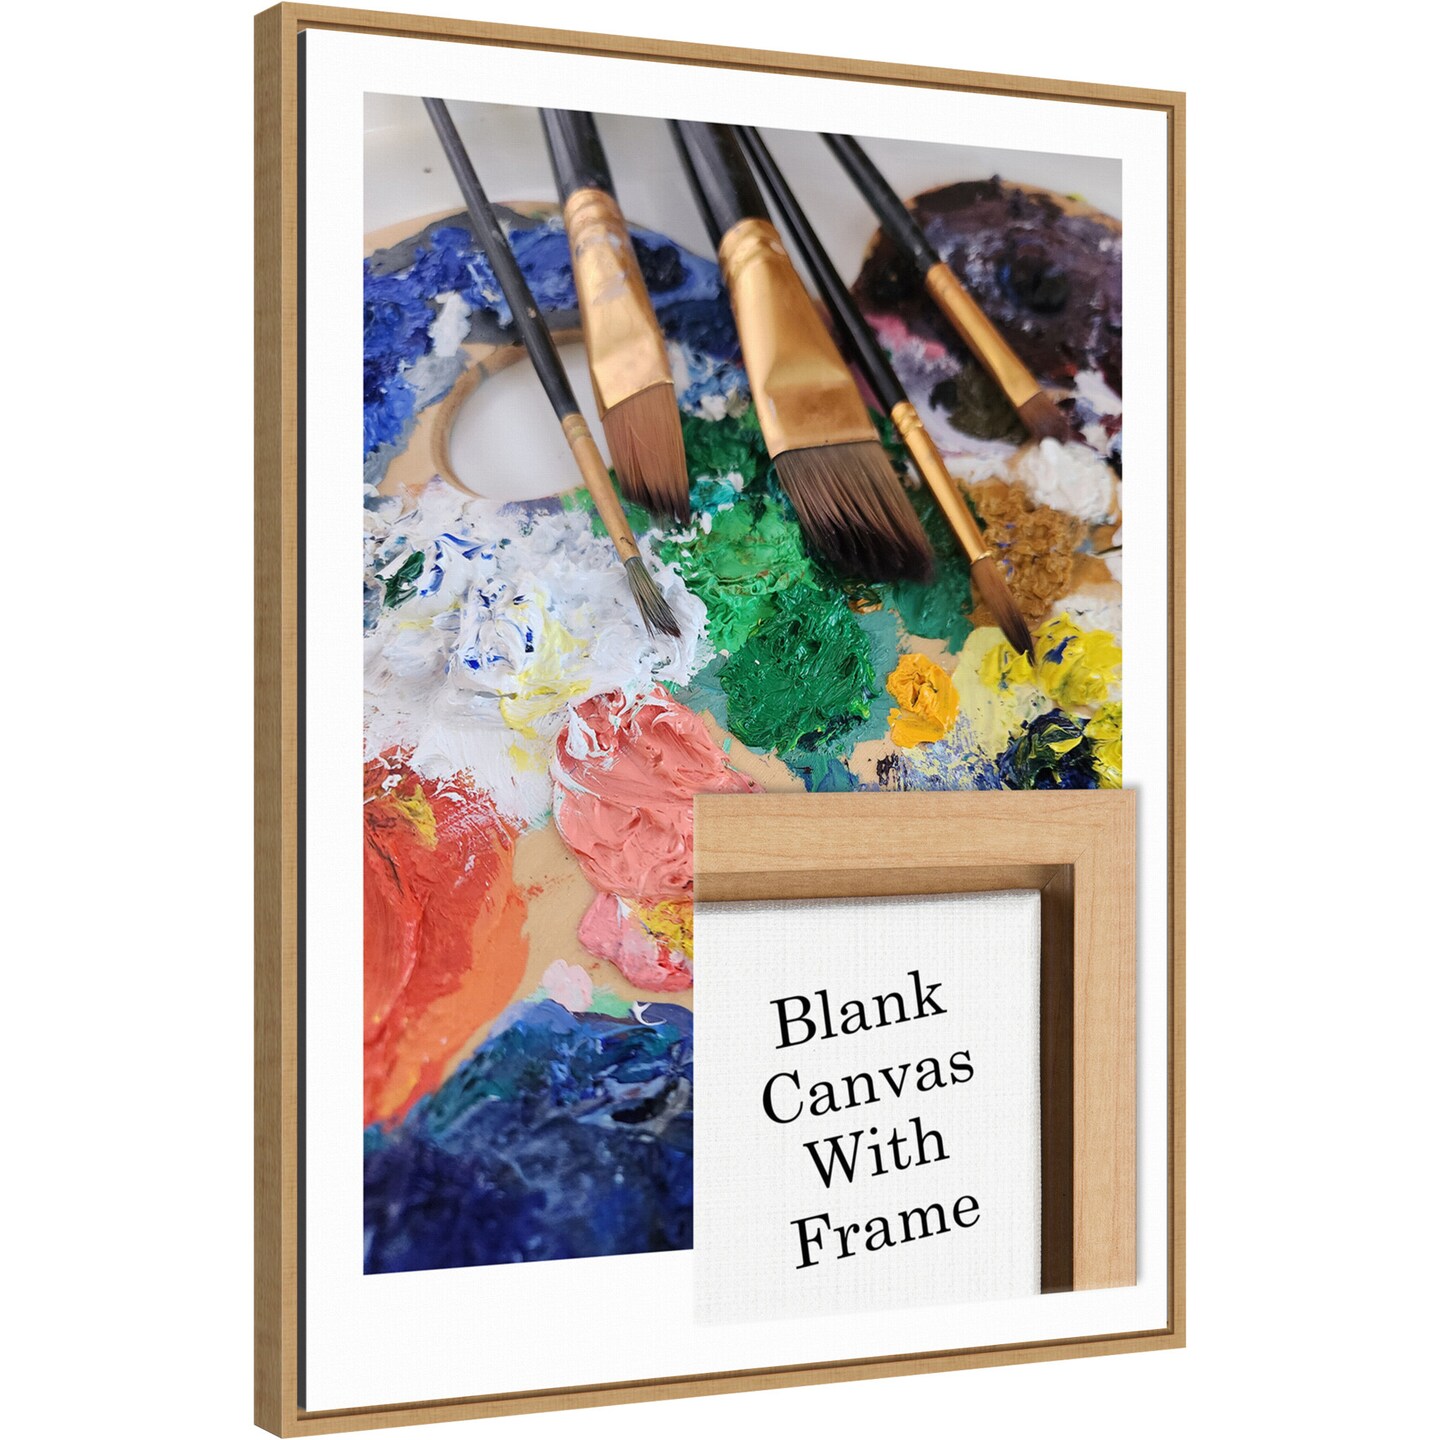 Framed Blank White Canvas for DIY Artwork, Crafts and Painting